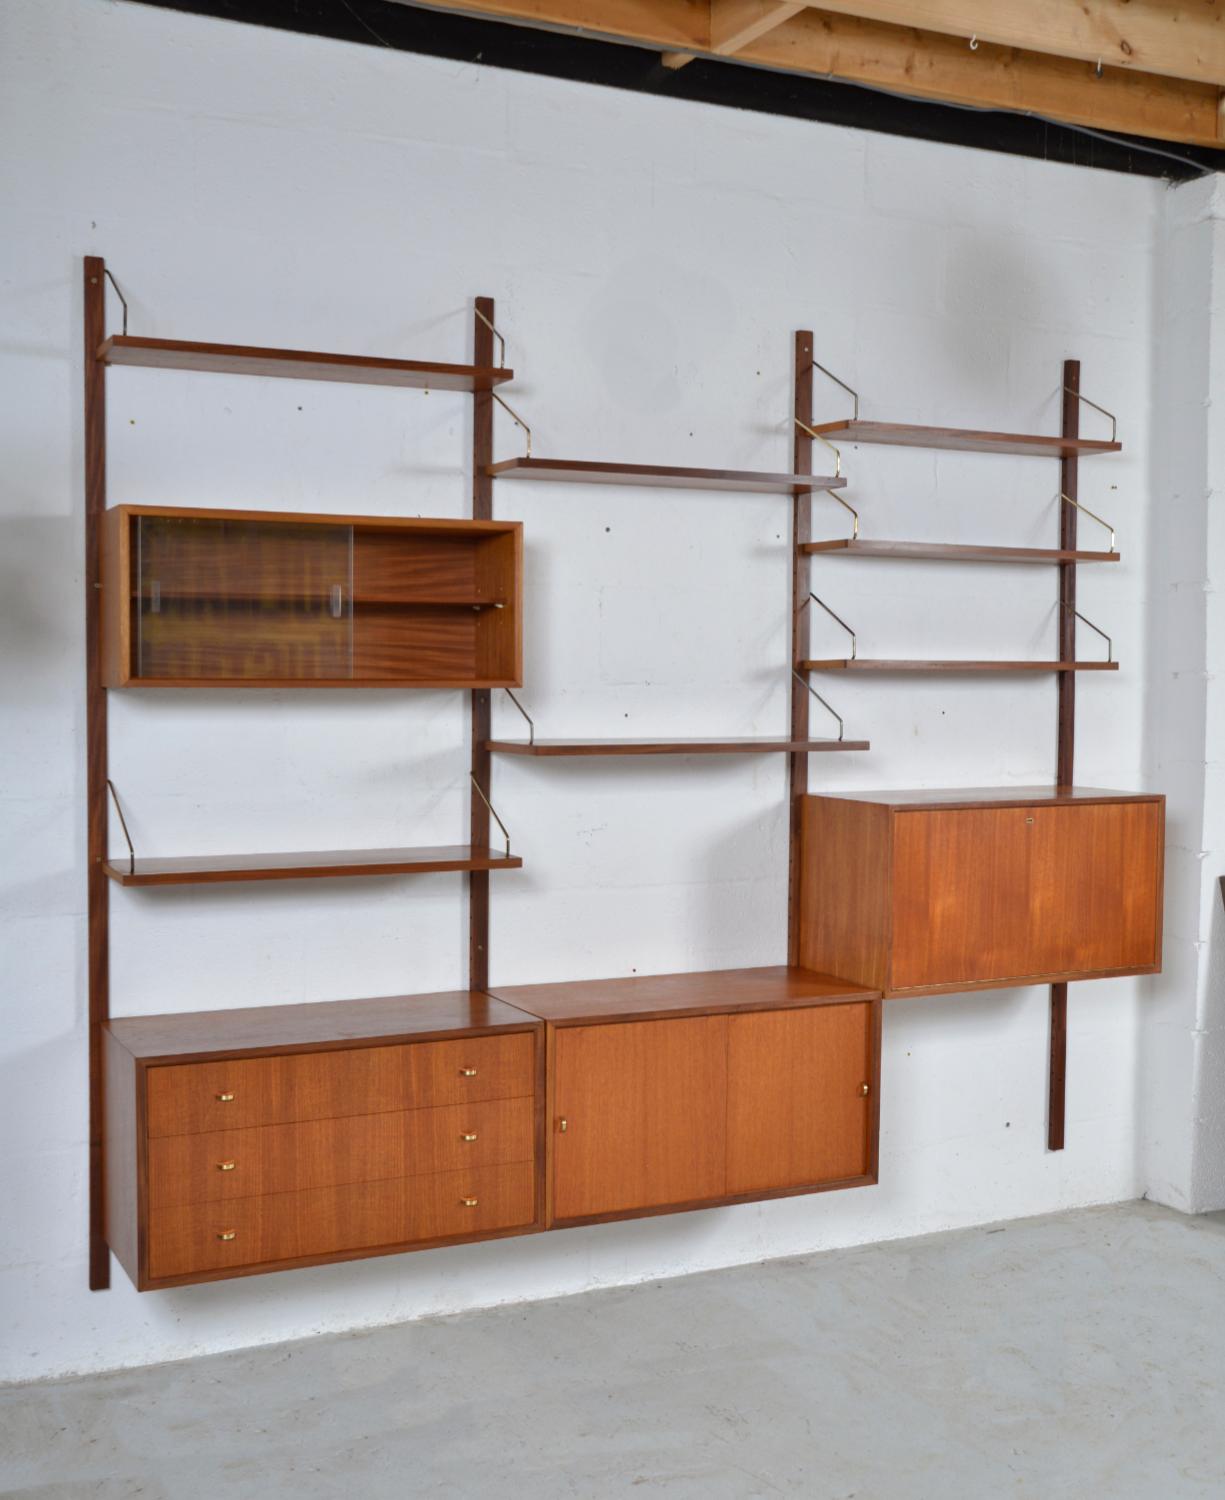 This highly versatile and functional “Royal System” was originally designed by Poul Cadovius in 1948. This particular piece is quintessentially Mid-century Modern being the first generation identified by the demi-lune brass handles. This three-bay